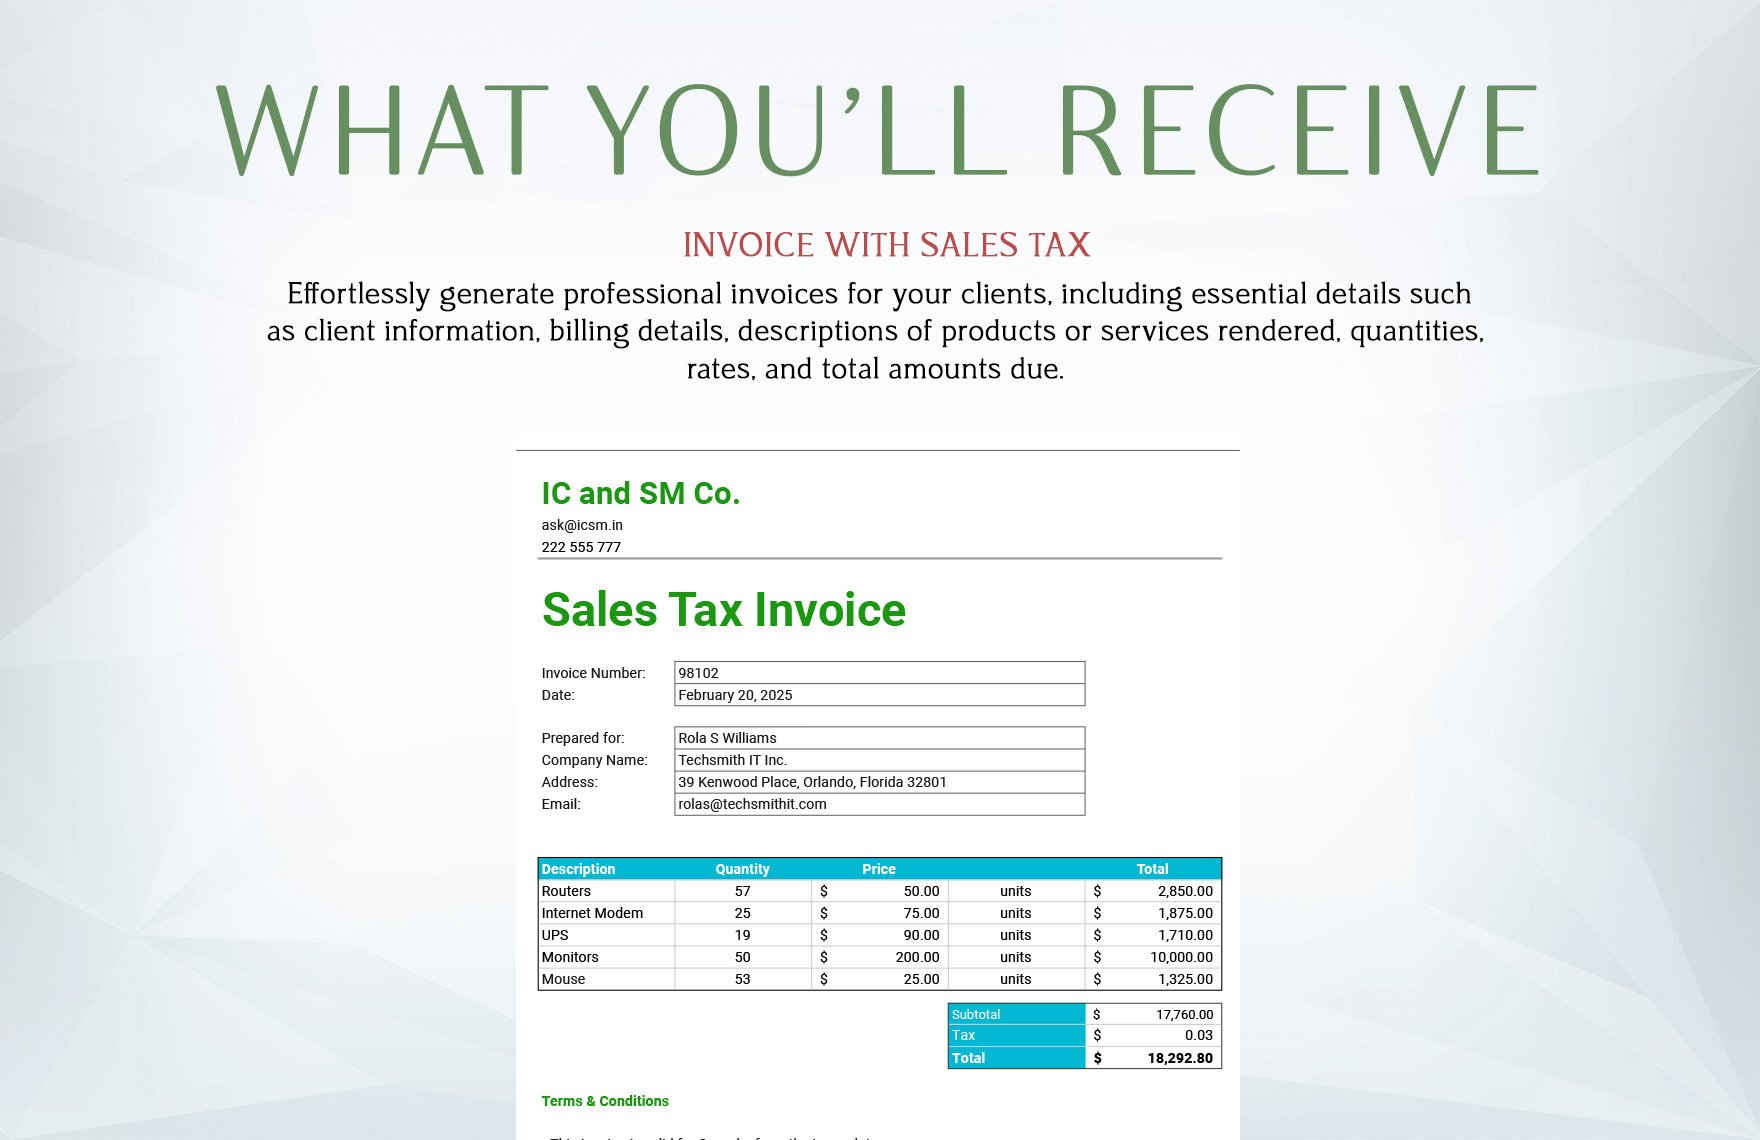 Invoice with Sales Tax Template